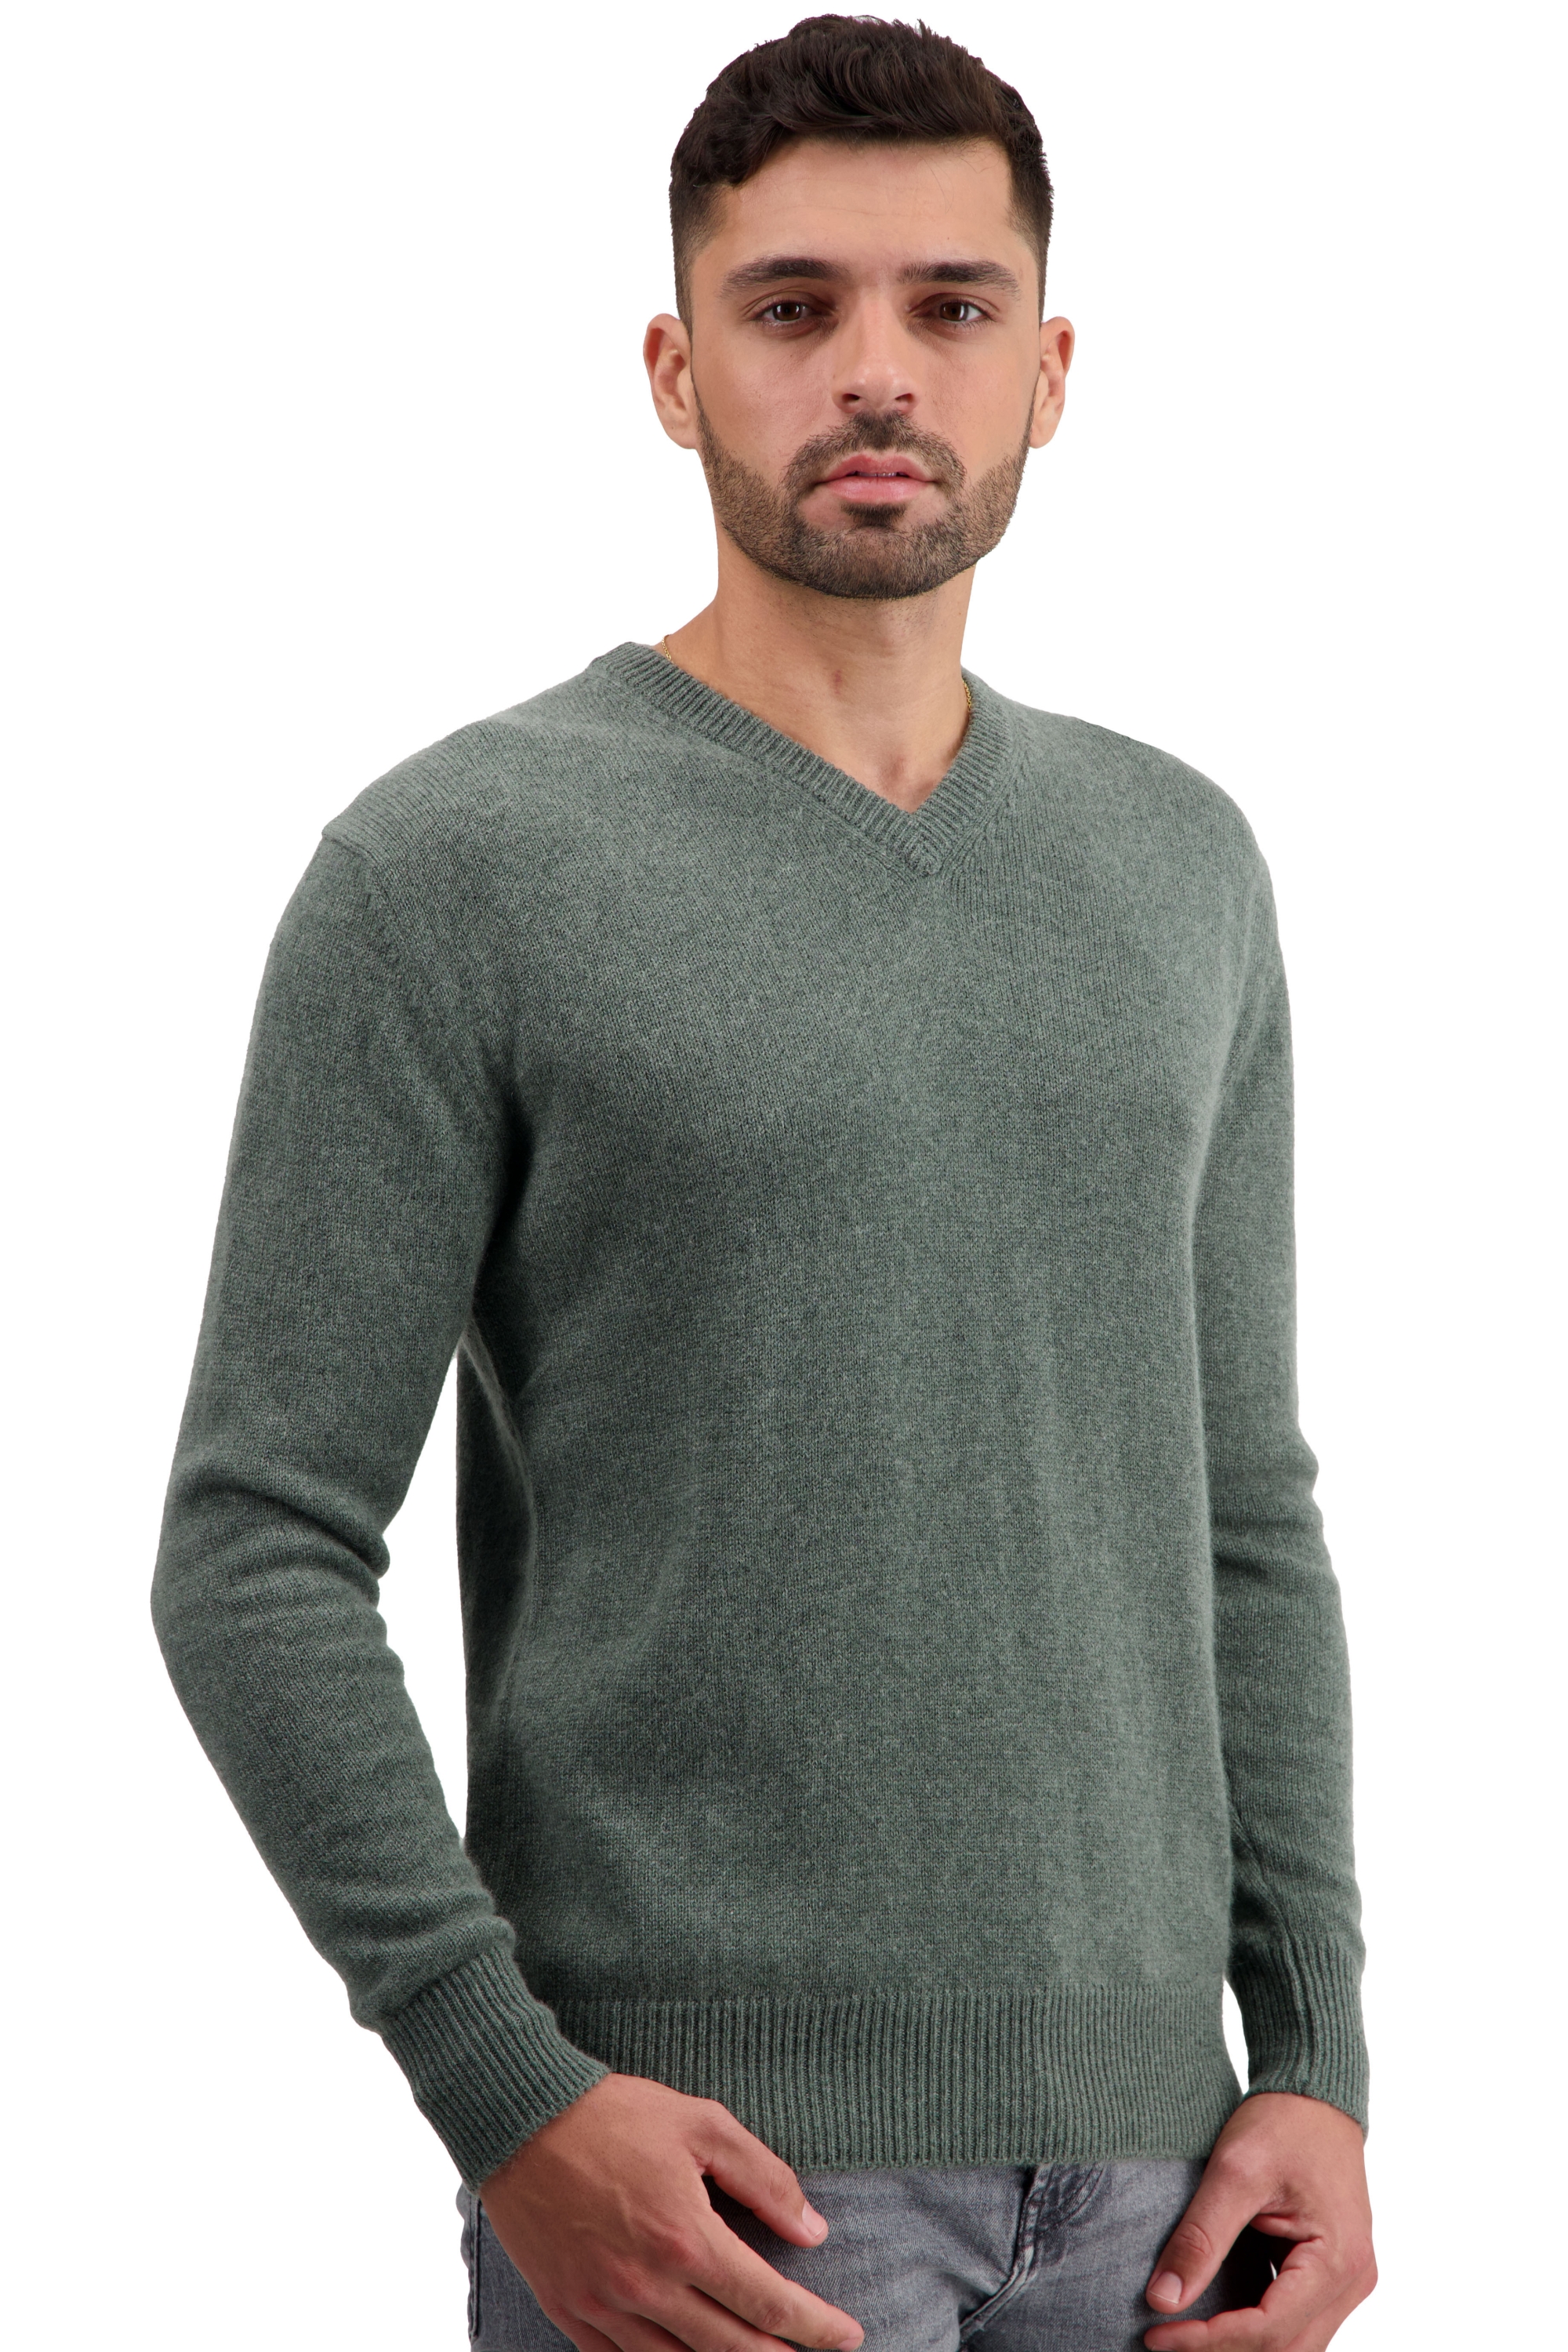 Cashmere men low prices tour first military green l